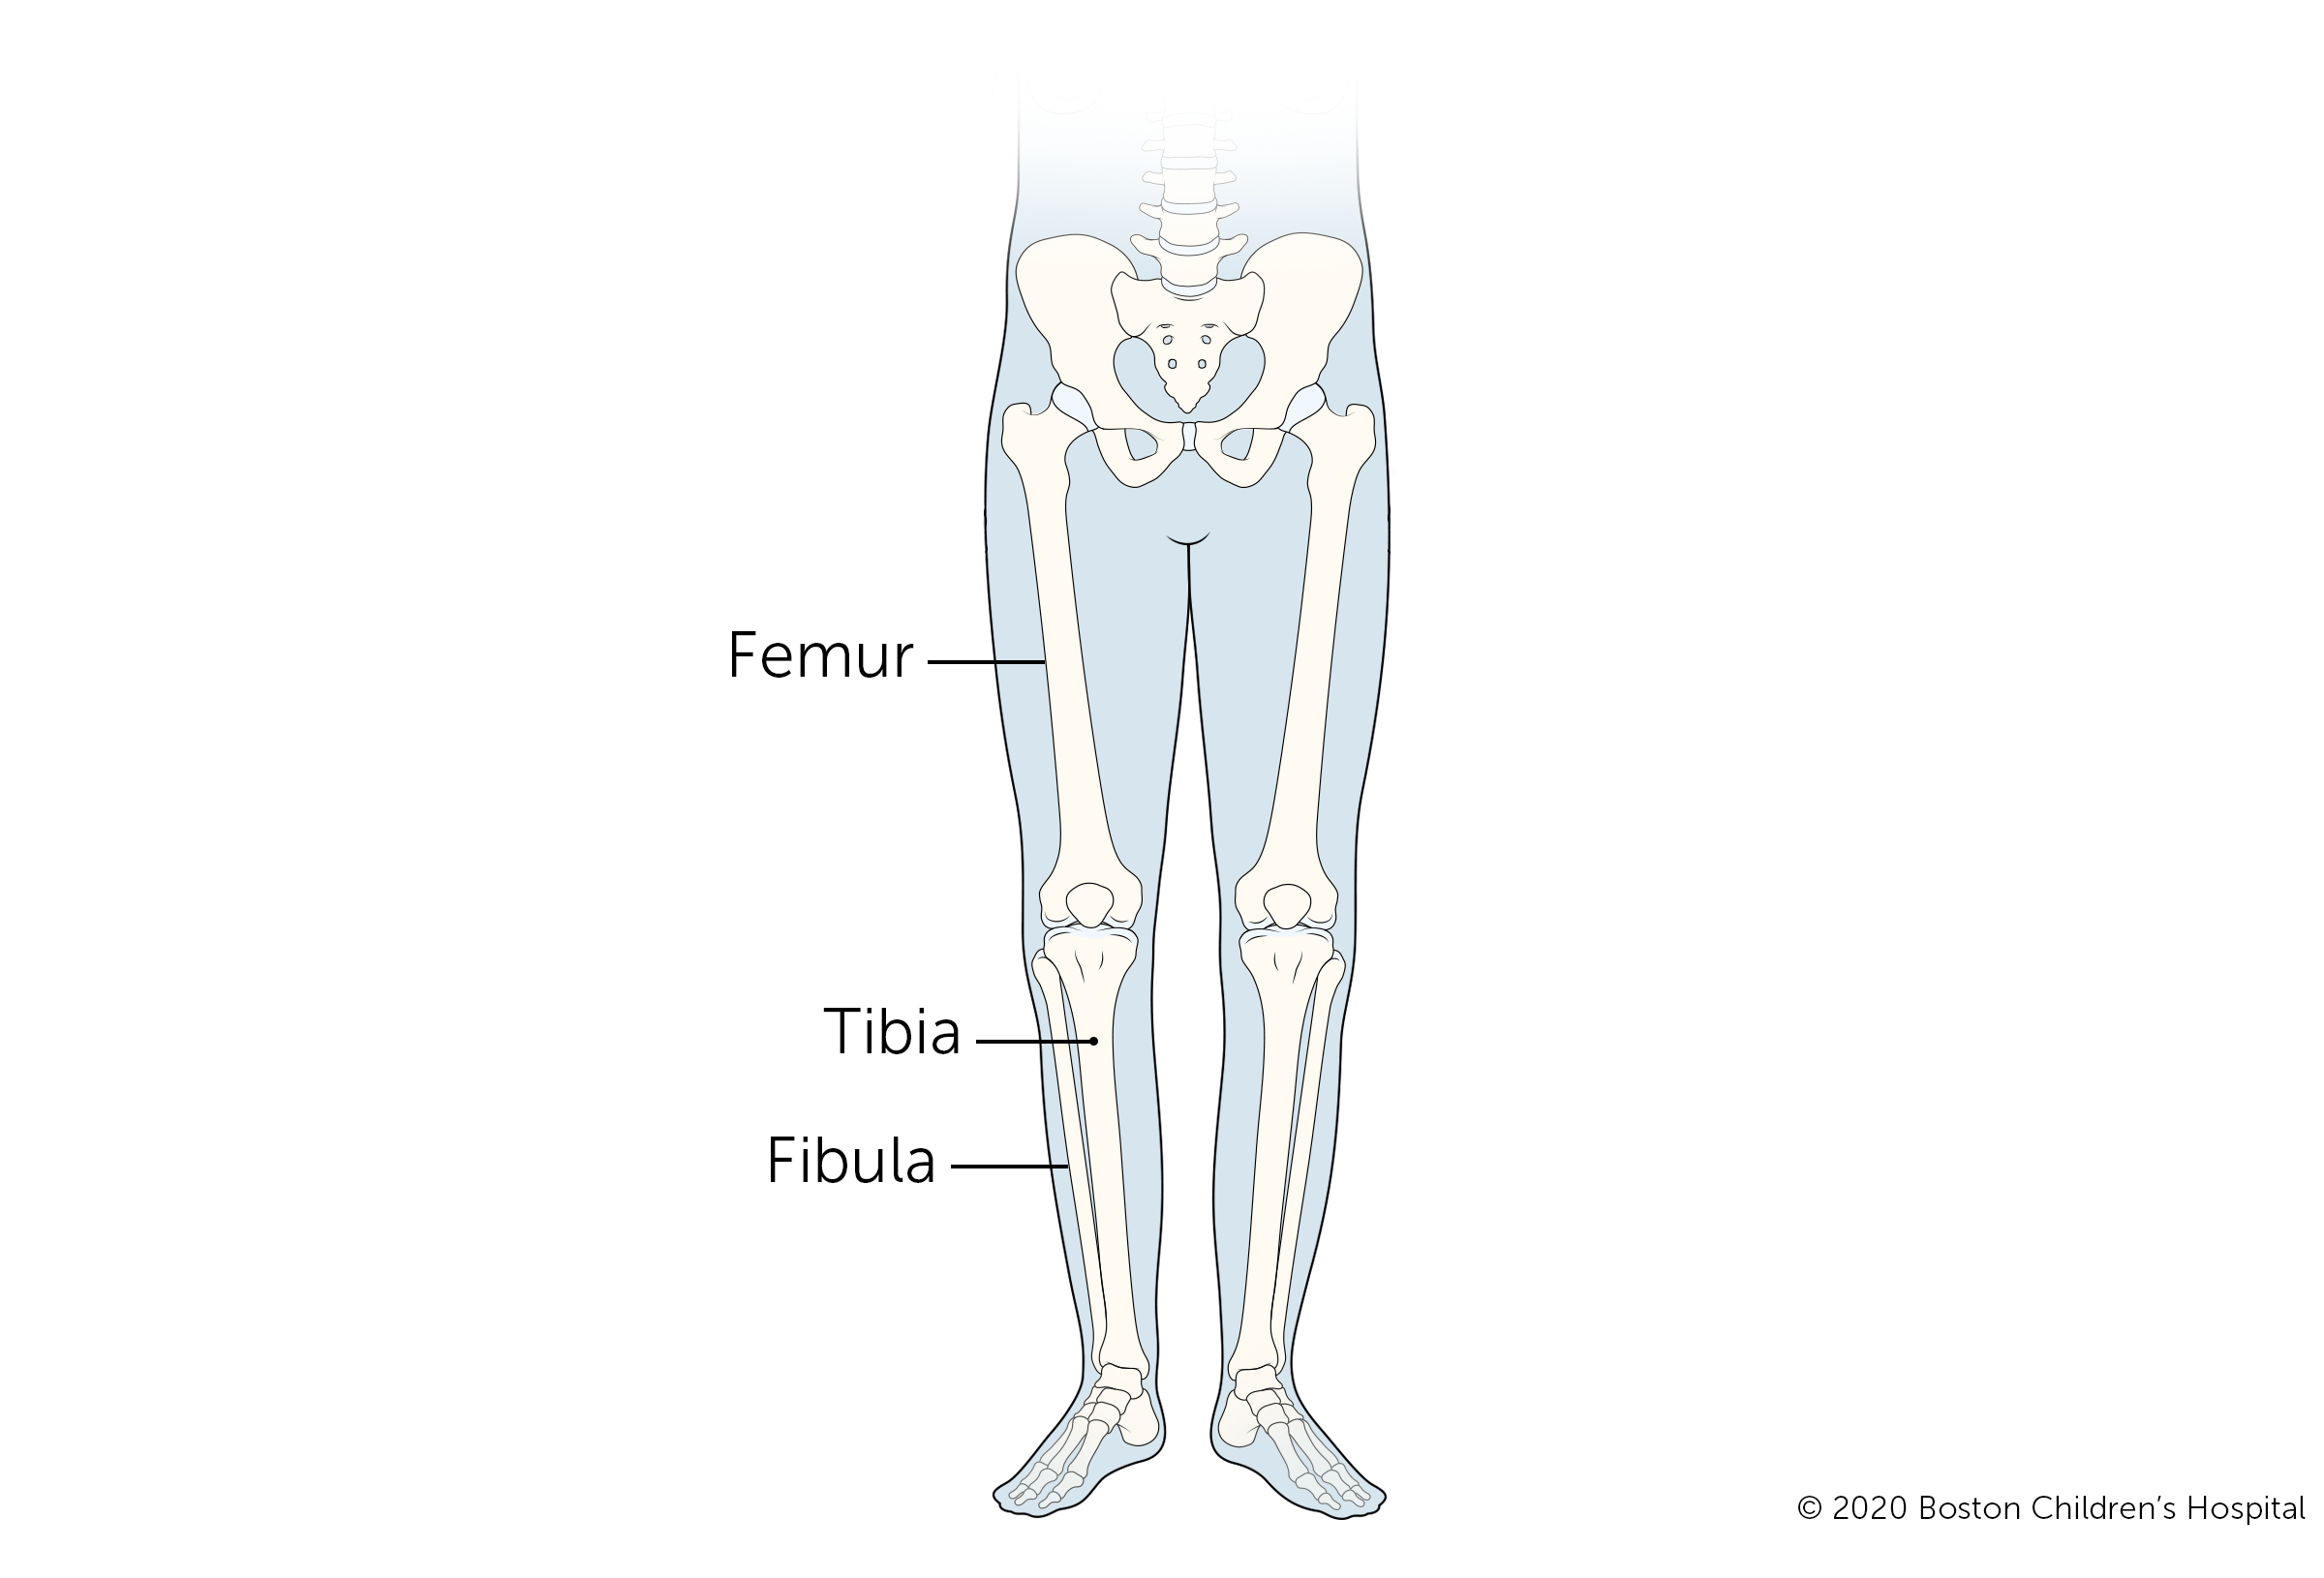 These are the three long bones in the leg: the femur, the tibia, and the fibula.